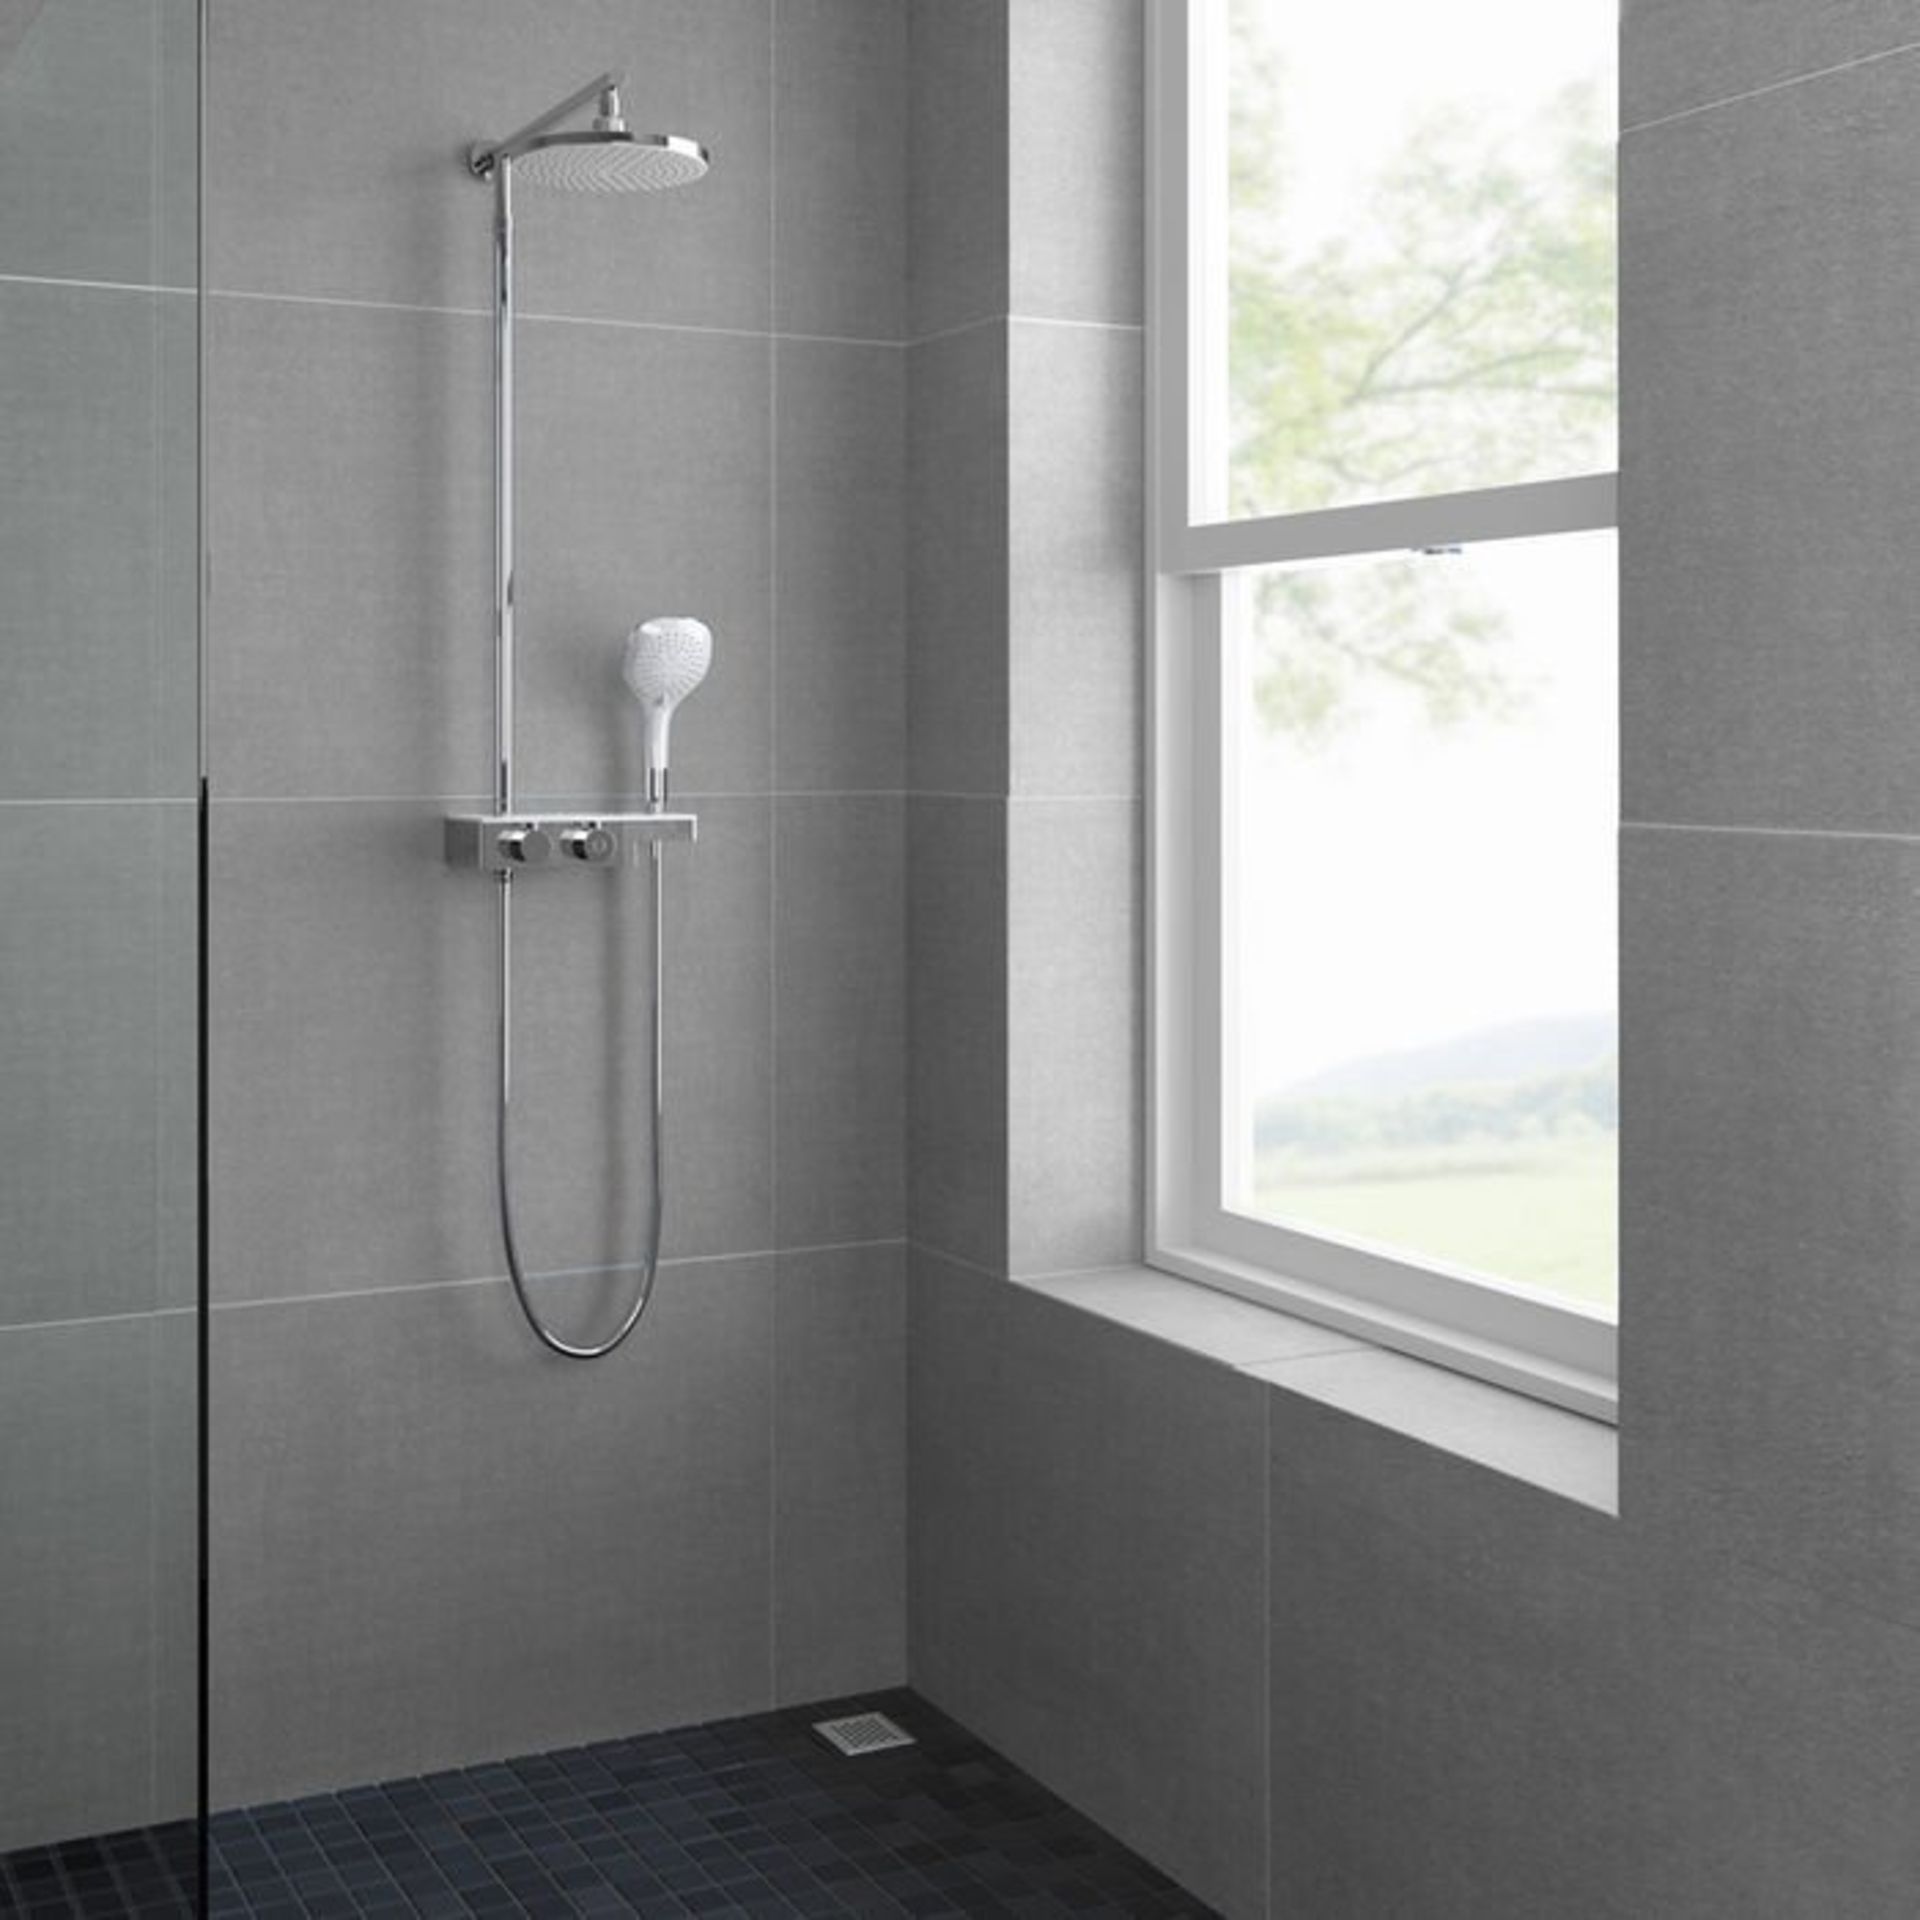 (S42)Round Exposed Thermostatic Mixer Shower Kit Medium Head & Shelf. Cool to touch shower for - Image 3 of 5